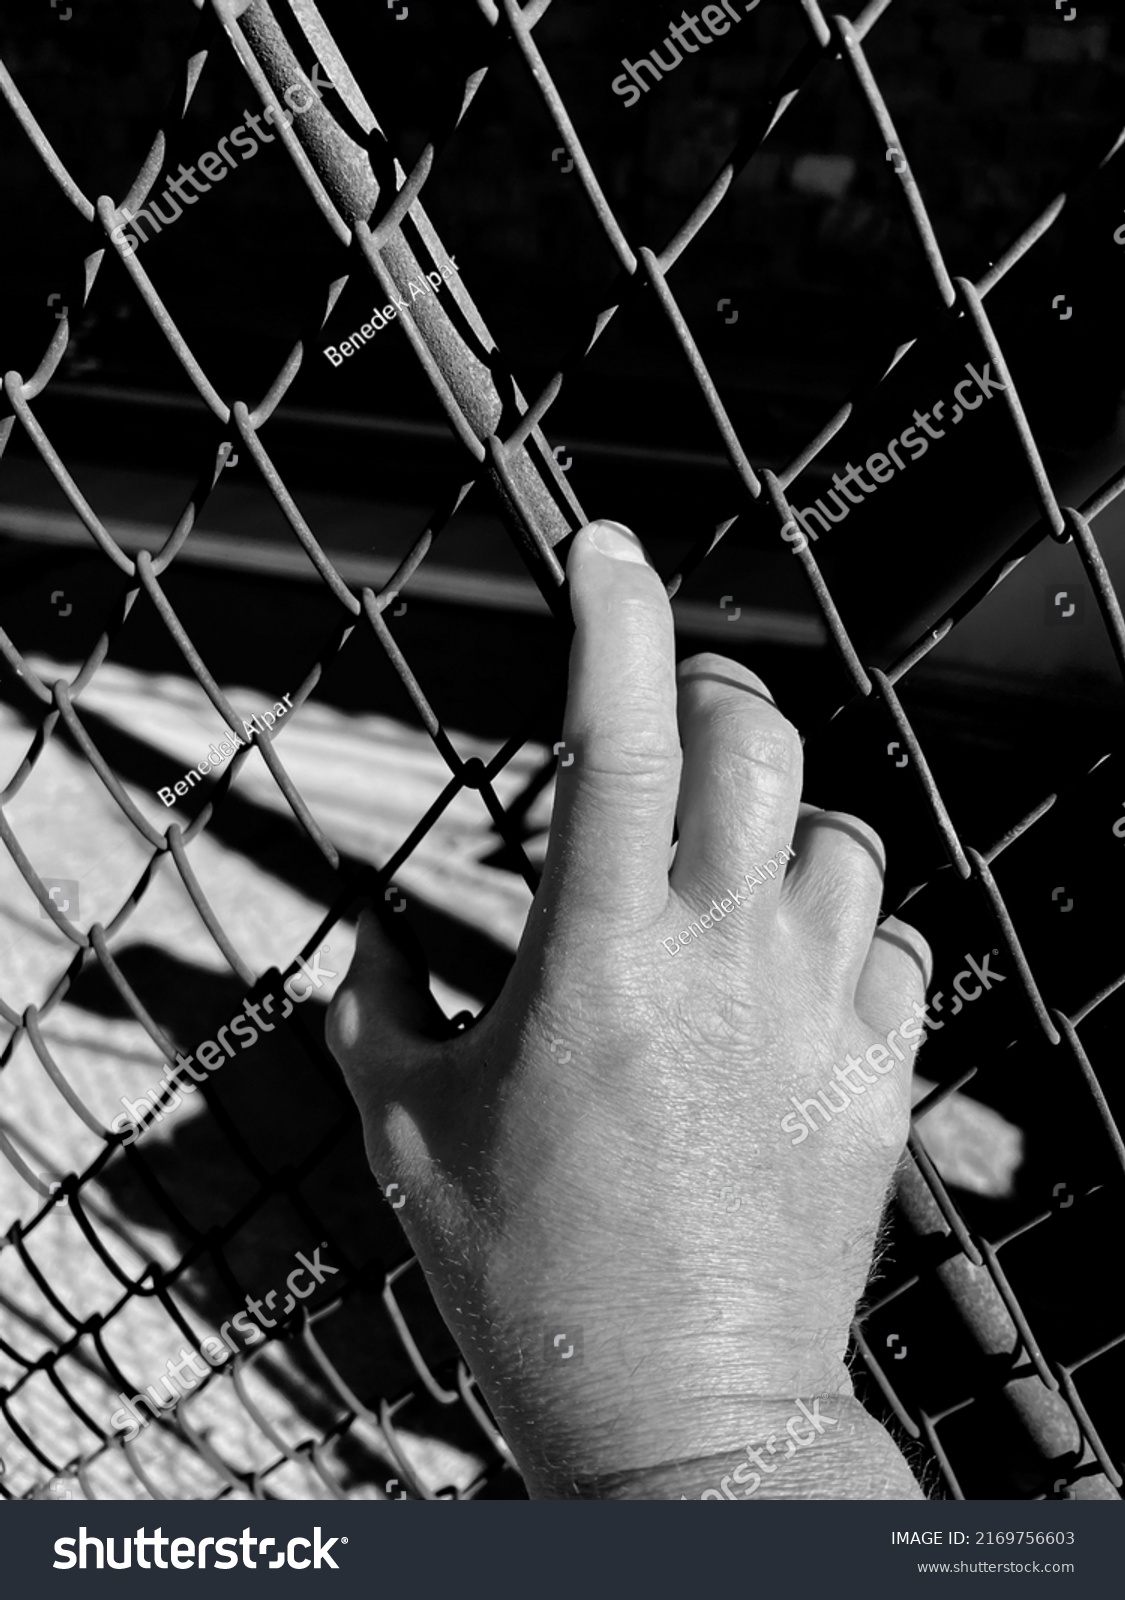 Vertical monochrome image, caucasian man holding the wire fence at the correctional institute. #2169756603